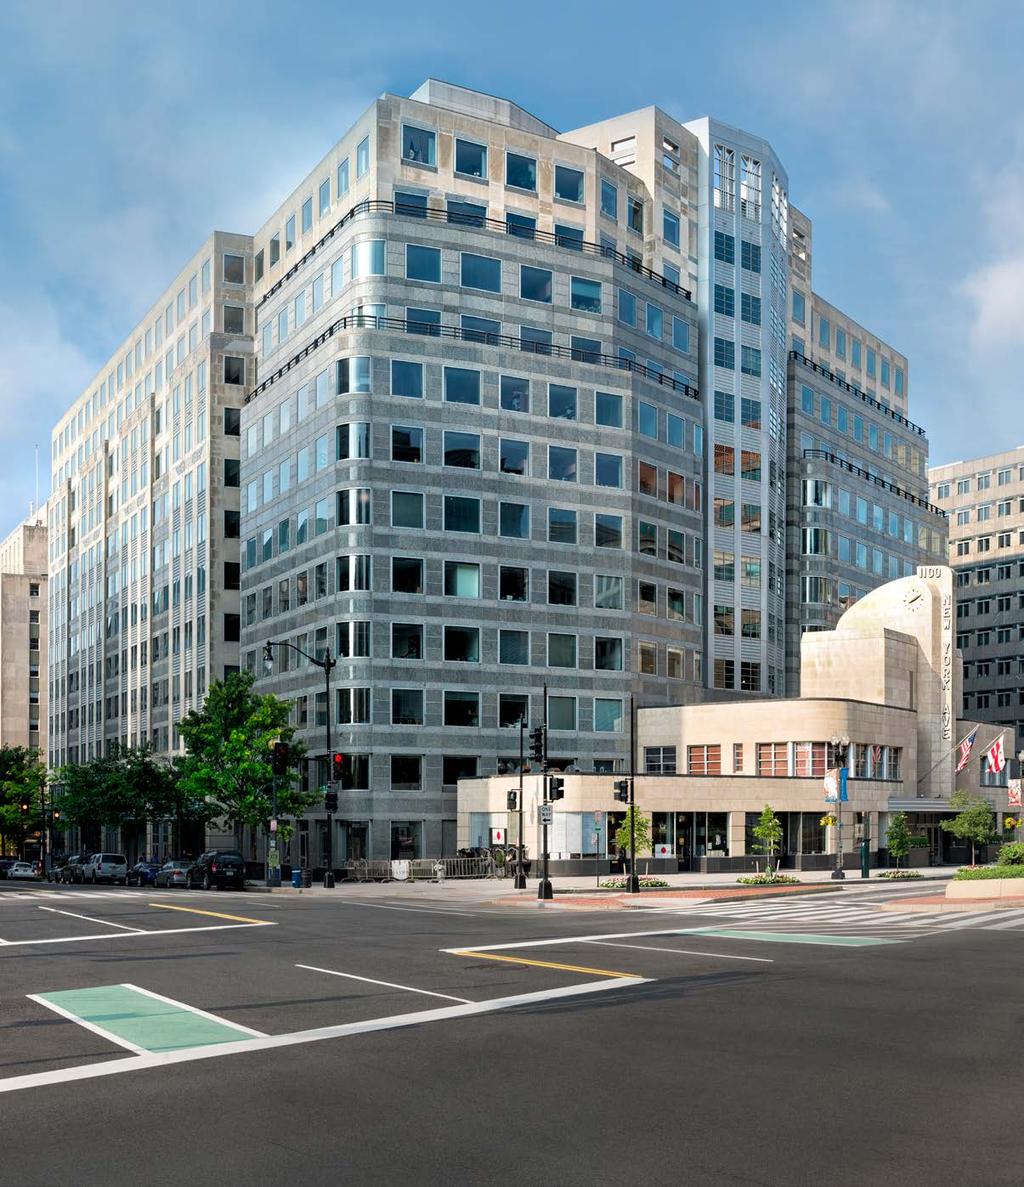 WHERE LOCATION CREATIVITY & ENERGY MEET 1100 New York Avenue NW At 1100 New York NW, tenants benefit from a fantastic, well developed neighborhood with the most